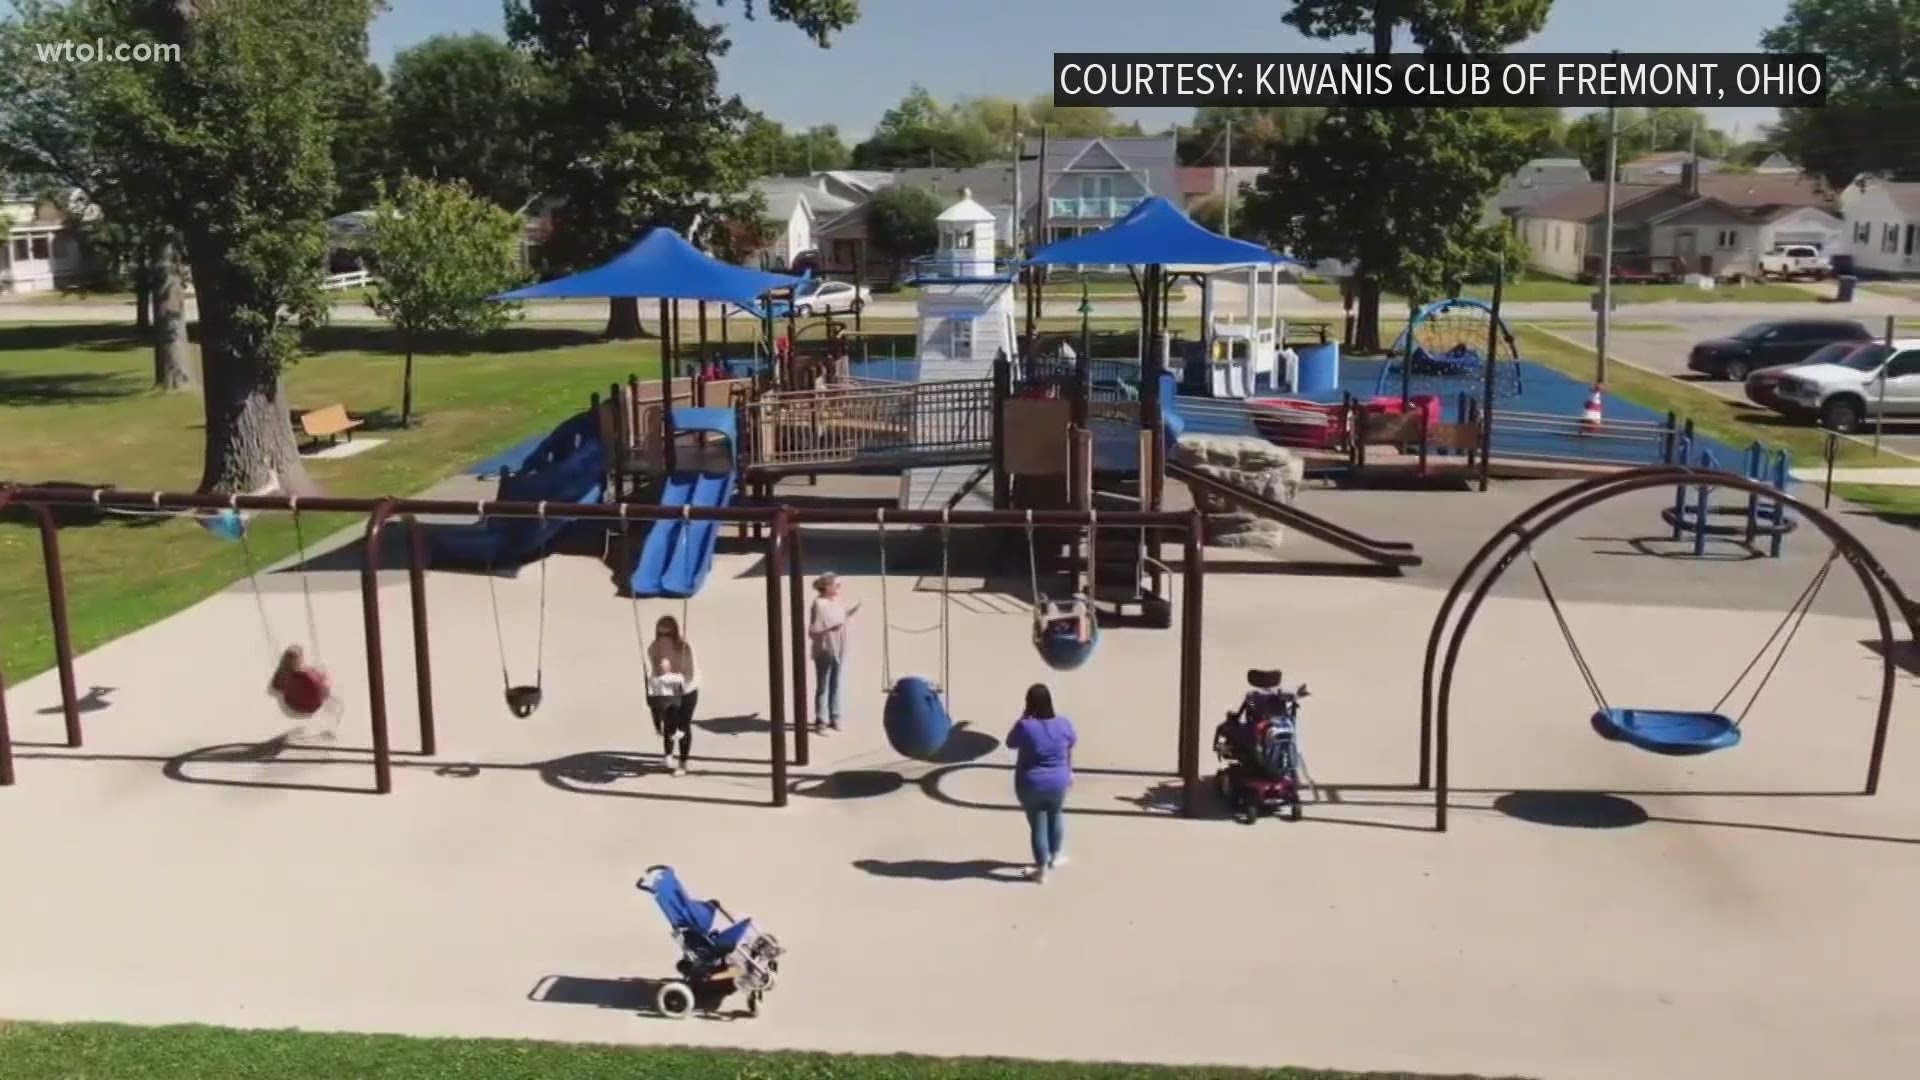 The Kiwanis Club of Fremont wants to make sure no child is left without a safe place to play.